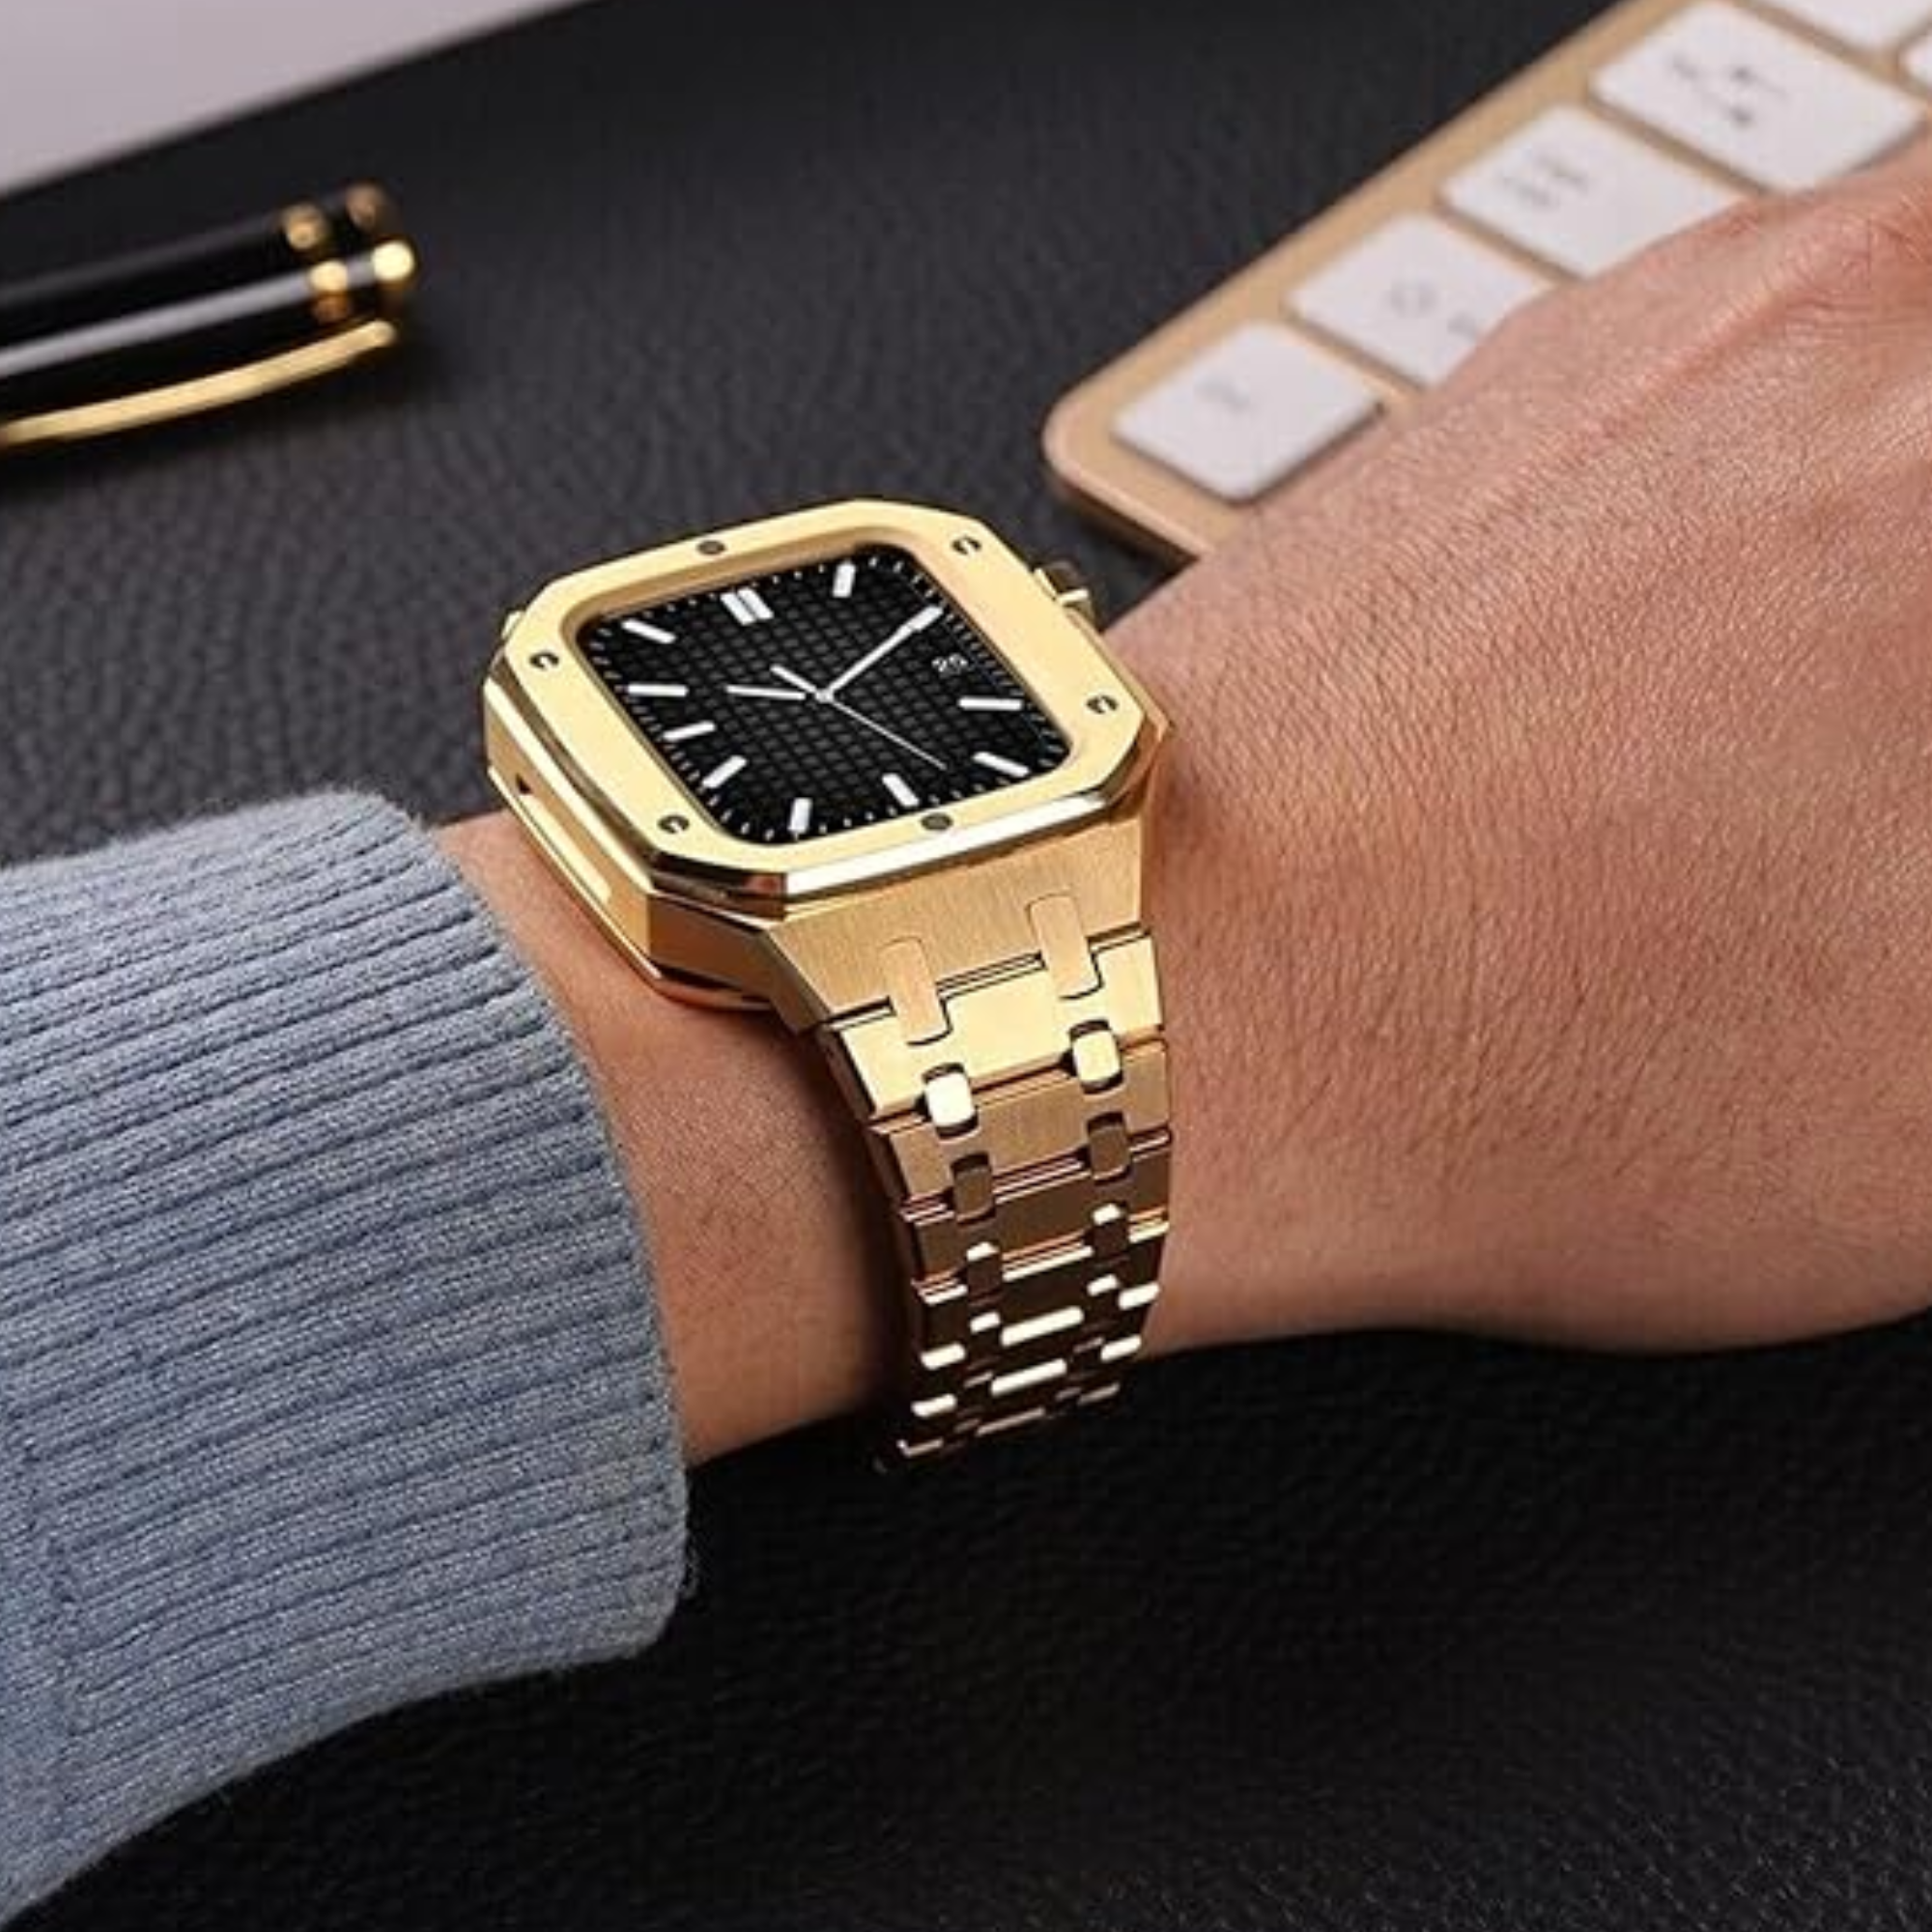 Luxury Metal Mod Kit For Apple Watch | Case With Jewels, Rubber & Stainless Steel Straps | Apple Watch SE/3/4/5/6 Accessory - 44 Mm| Golden Case - Golden Band